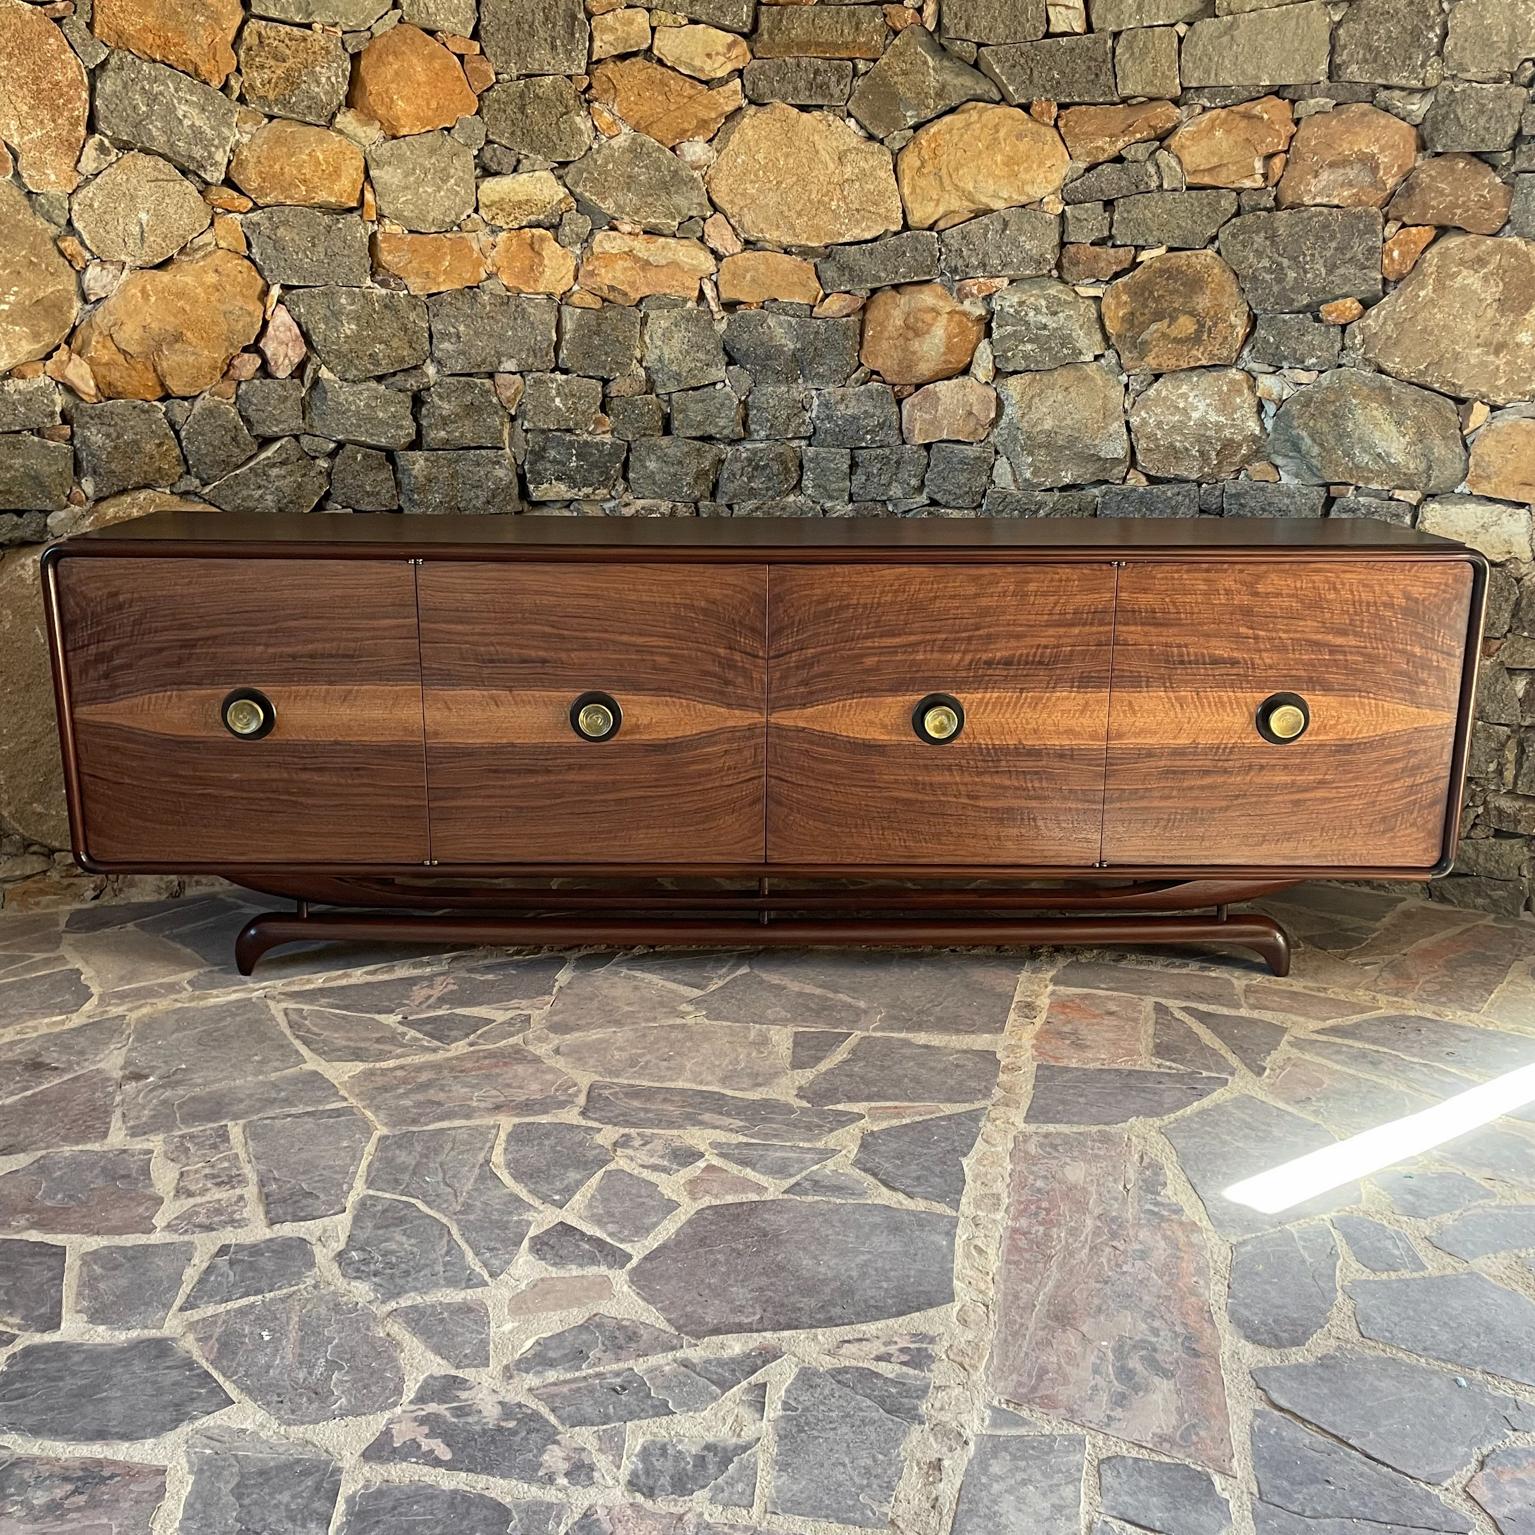 Credenza
Sensational Style of Frank Kyle Custom Credenza Mexico City 1950s
Richly grained wood presentation. Dynamite curves. Sculptural solid mahogany legs.
Cabinet in mahogany and exotic woods with round bronze hardware.
Includes set of pullout